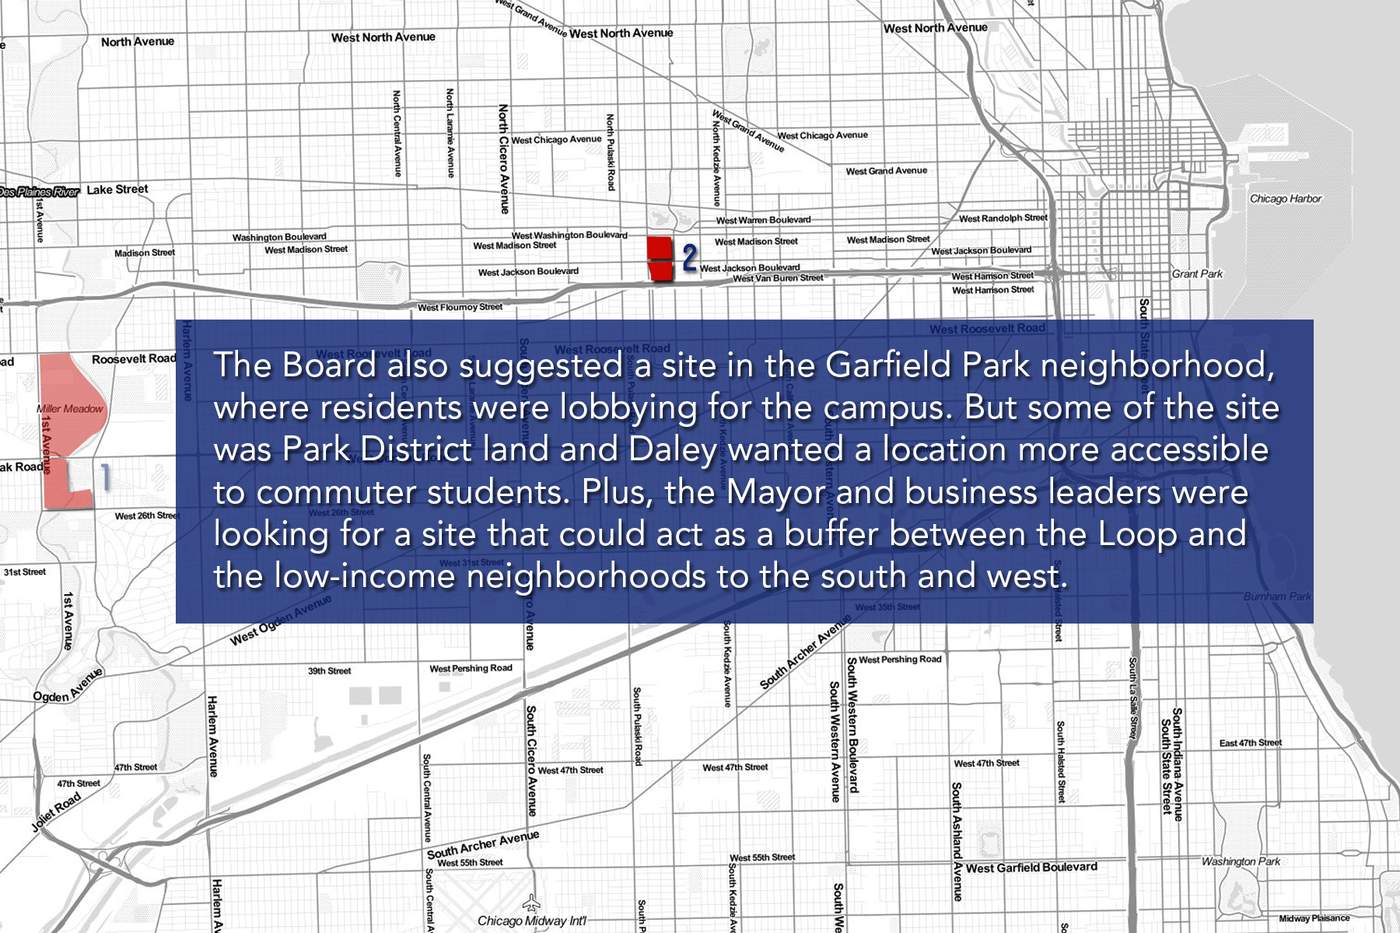 The Board also suggested a site in the Garfield Park neighborhood, where residents were lobbying for the campus. But some of the site was Park District land and Daley wanted a location more accessible to commuter students. Plus, the Mayor and business leaders were looking for a site that could act as a buffer between the Loop and the low-income neighborhoods to the south and west.